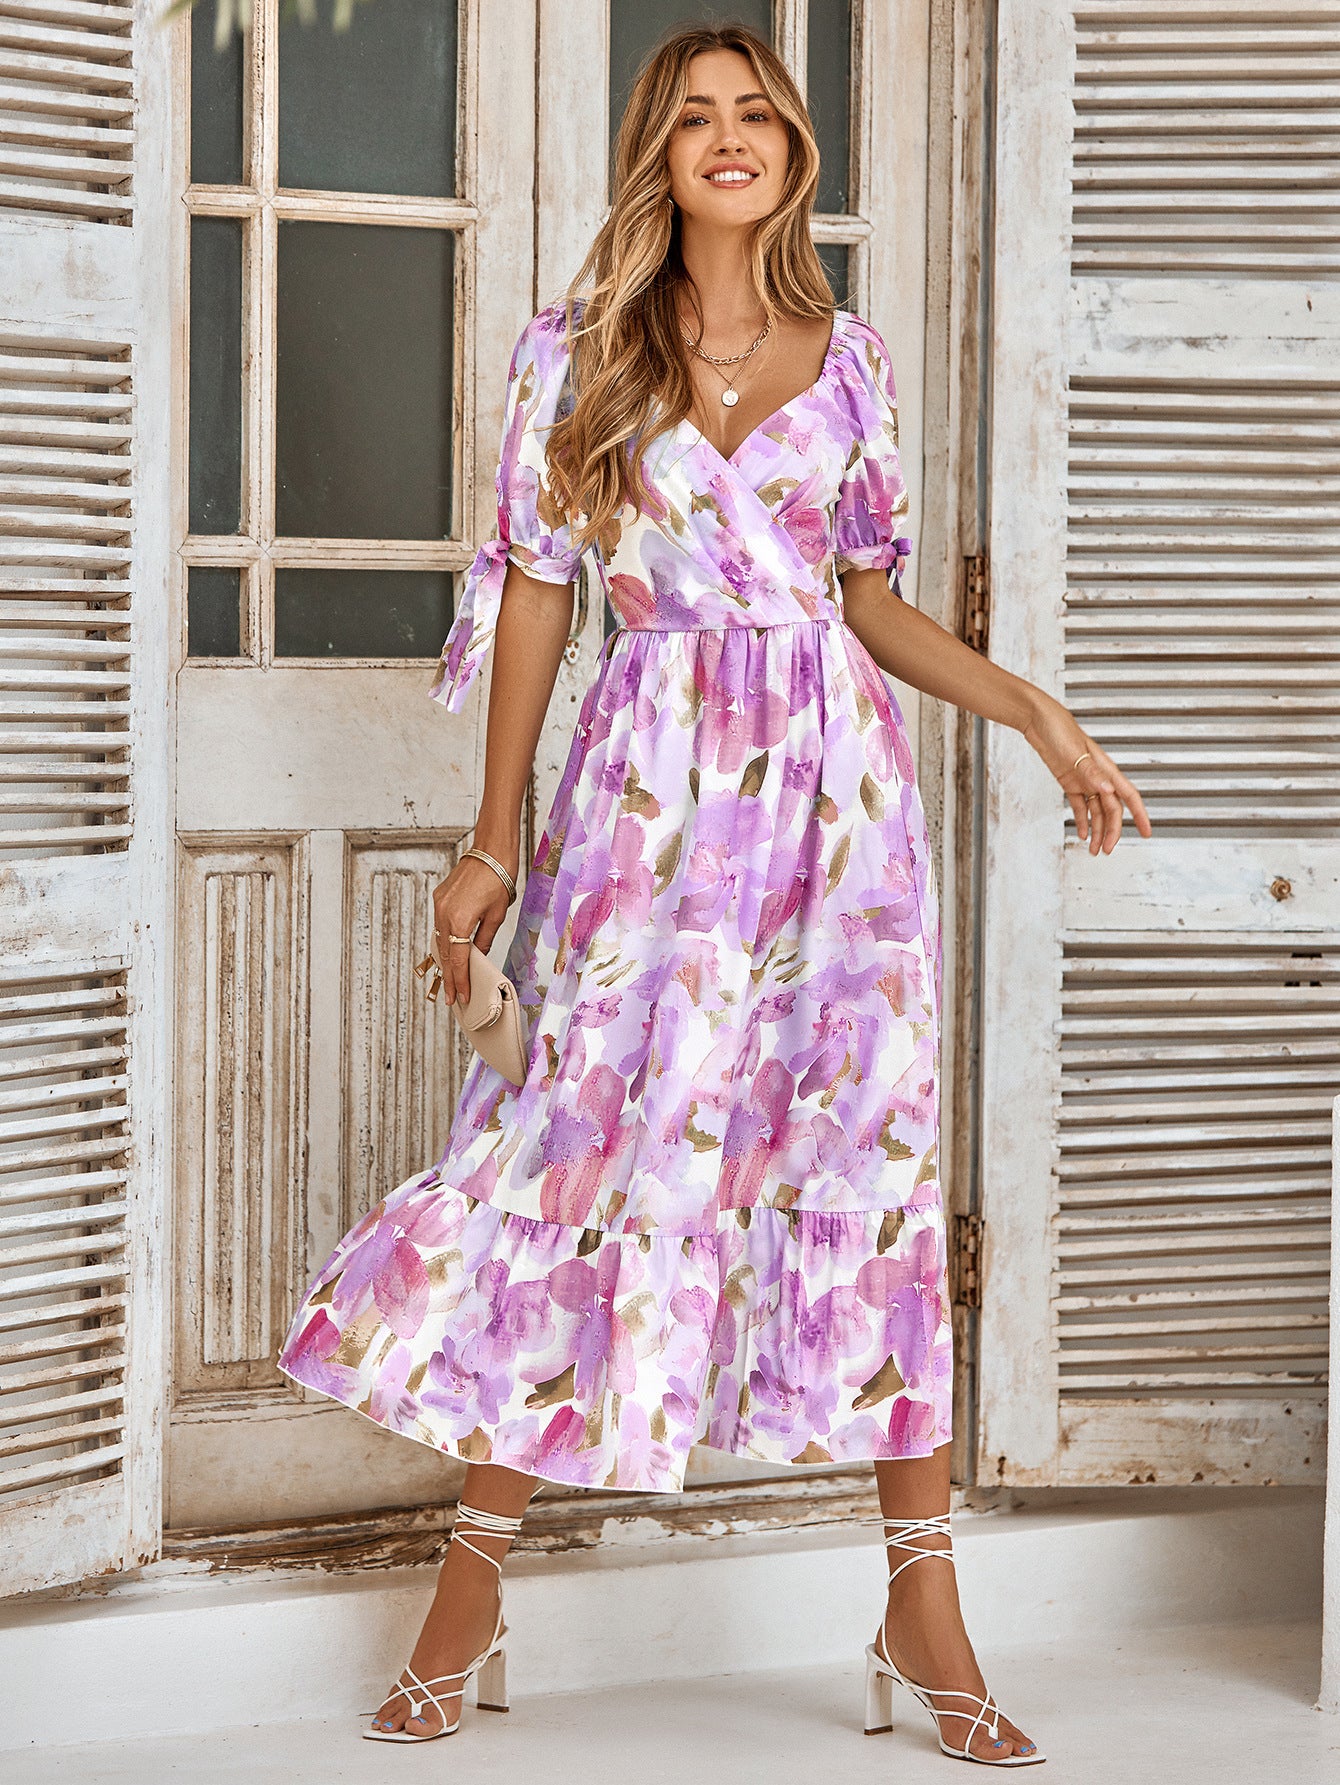 Summer Women Clothes Casual Printed Waist Controlled Puff Sleeve V neck Maxi Dress